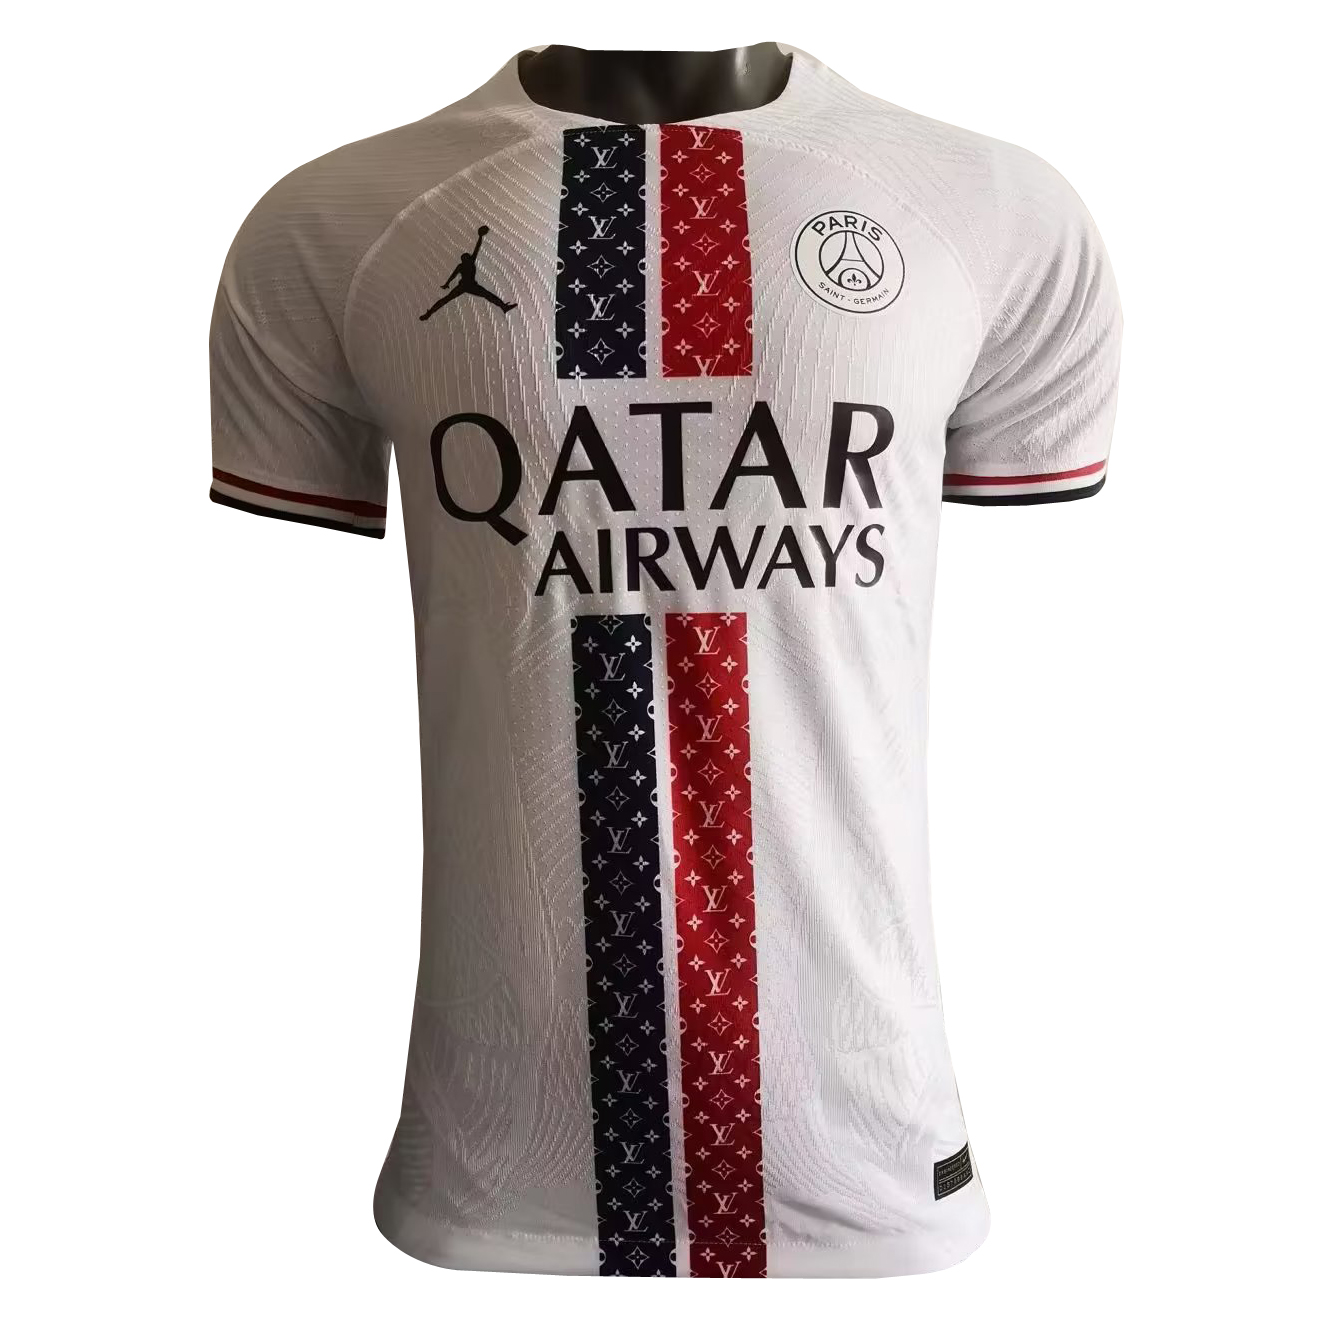 PSG x Louis Vuitton Concept Kit – Kitted Stories